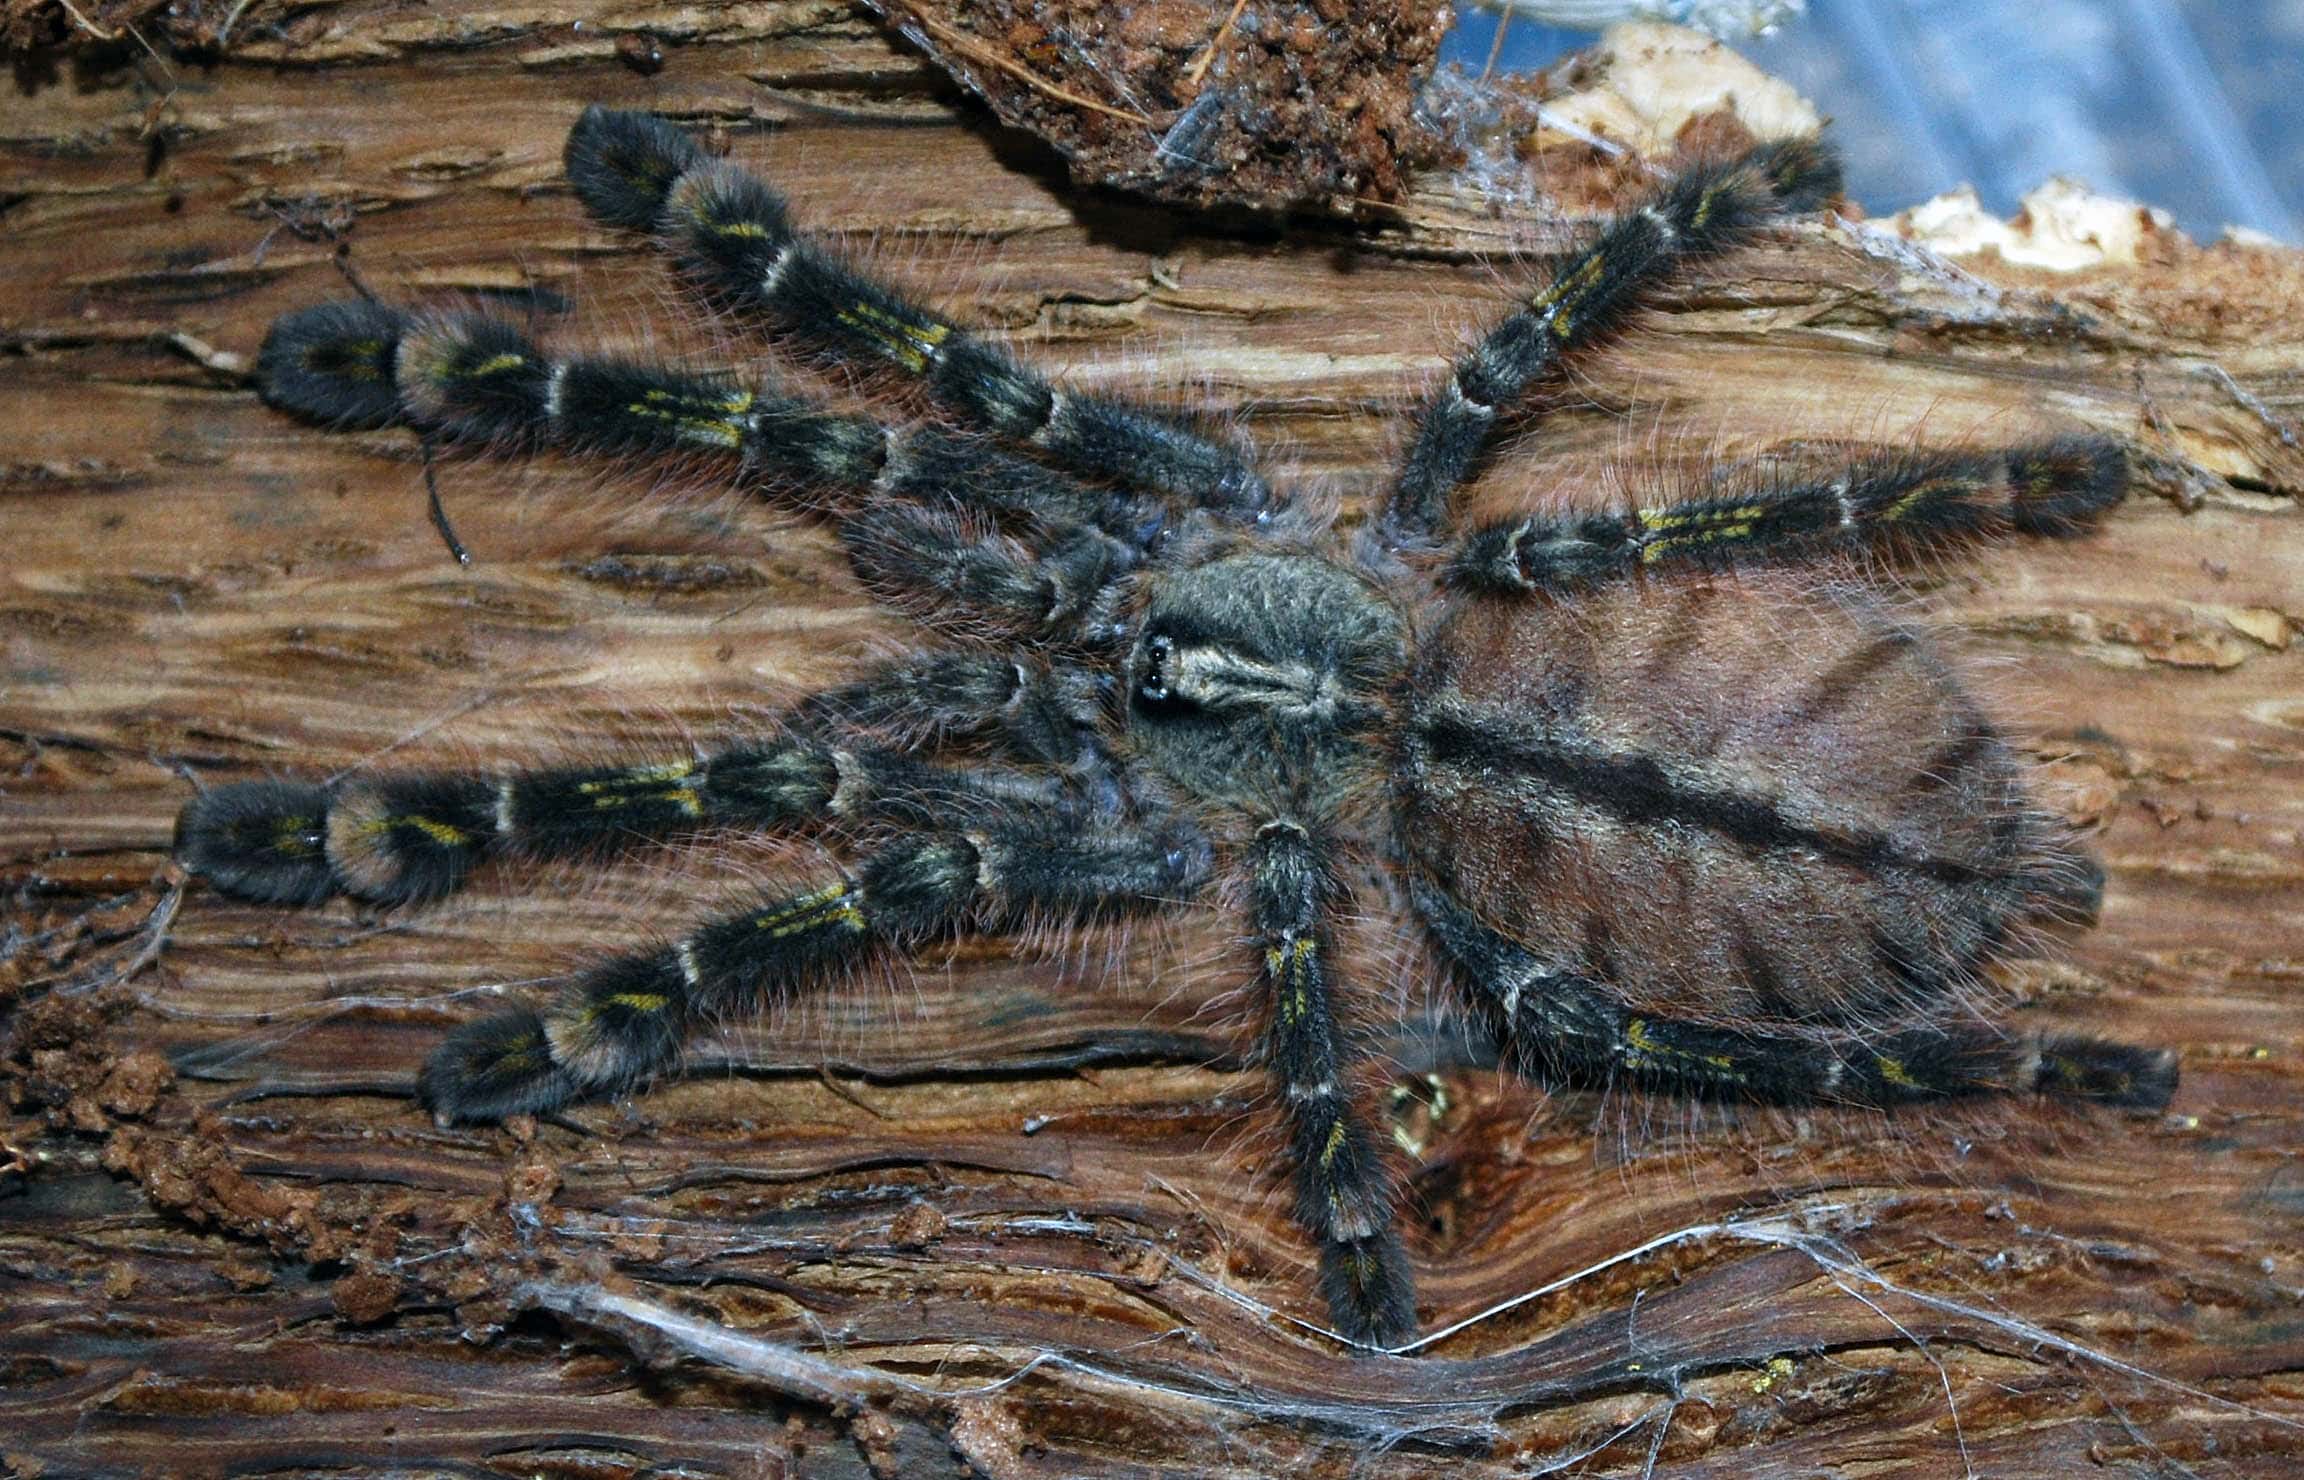 <p>The slate-red ornamental tree spider is an Old World tarantula. Old World tarantulas do not have urticating hairs to kick at assailants. Instead, their only means of defense is to bite. They will only attack if running or hiding doesn't work first. They are native to India and have a leg span of nine inches. </p>